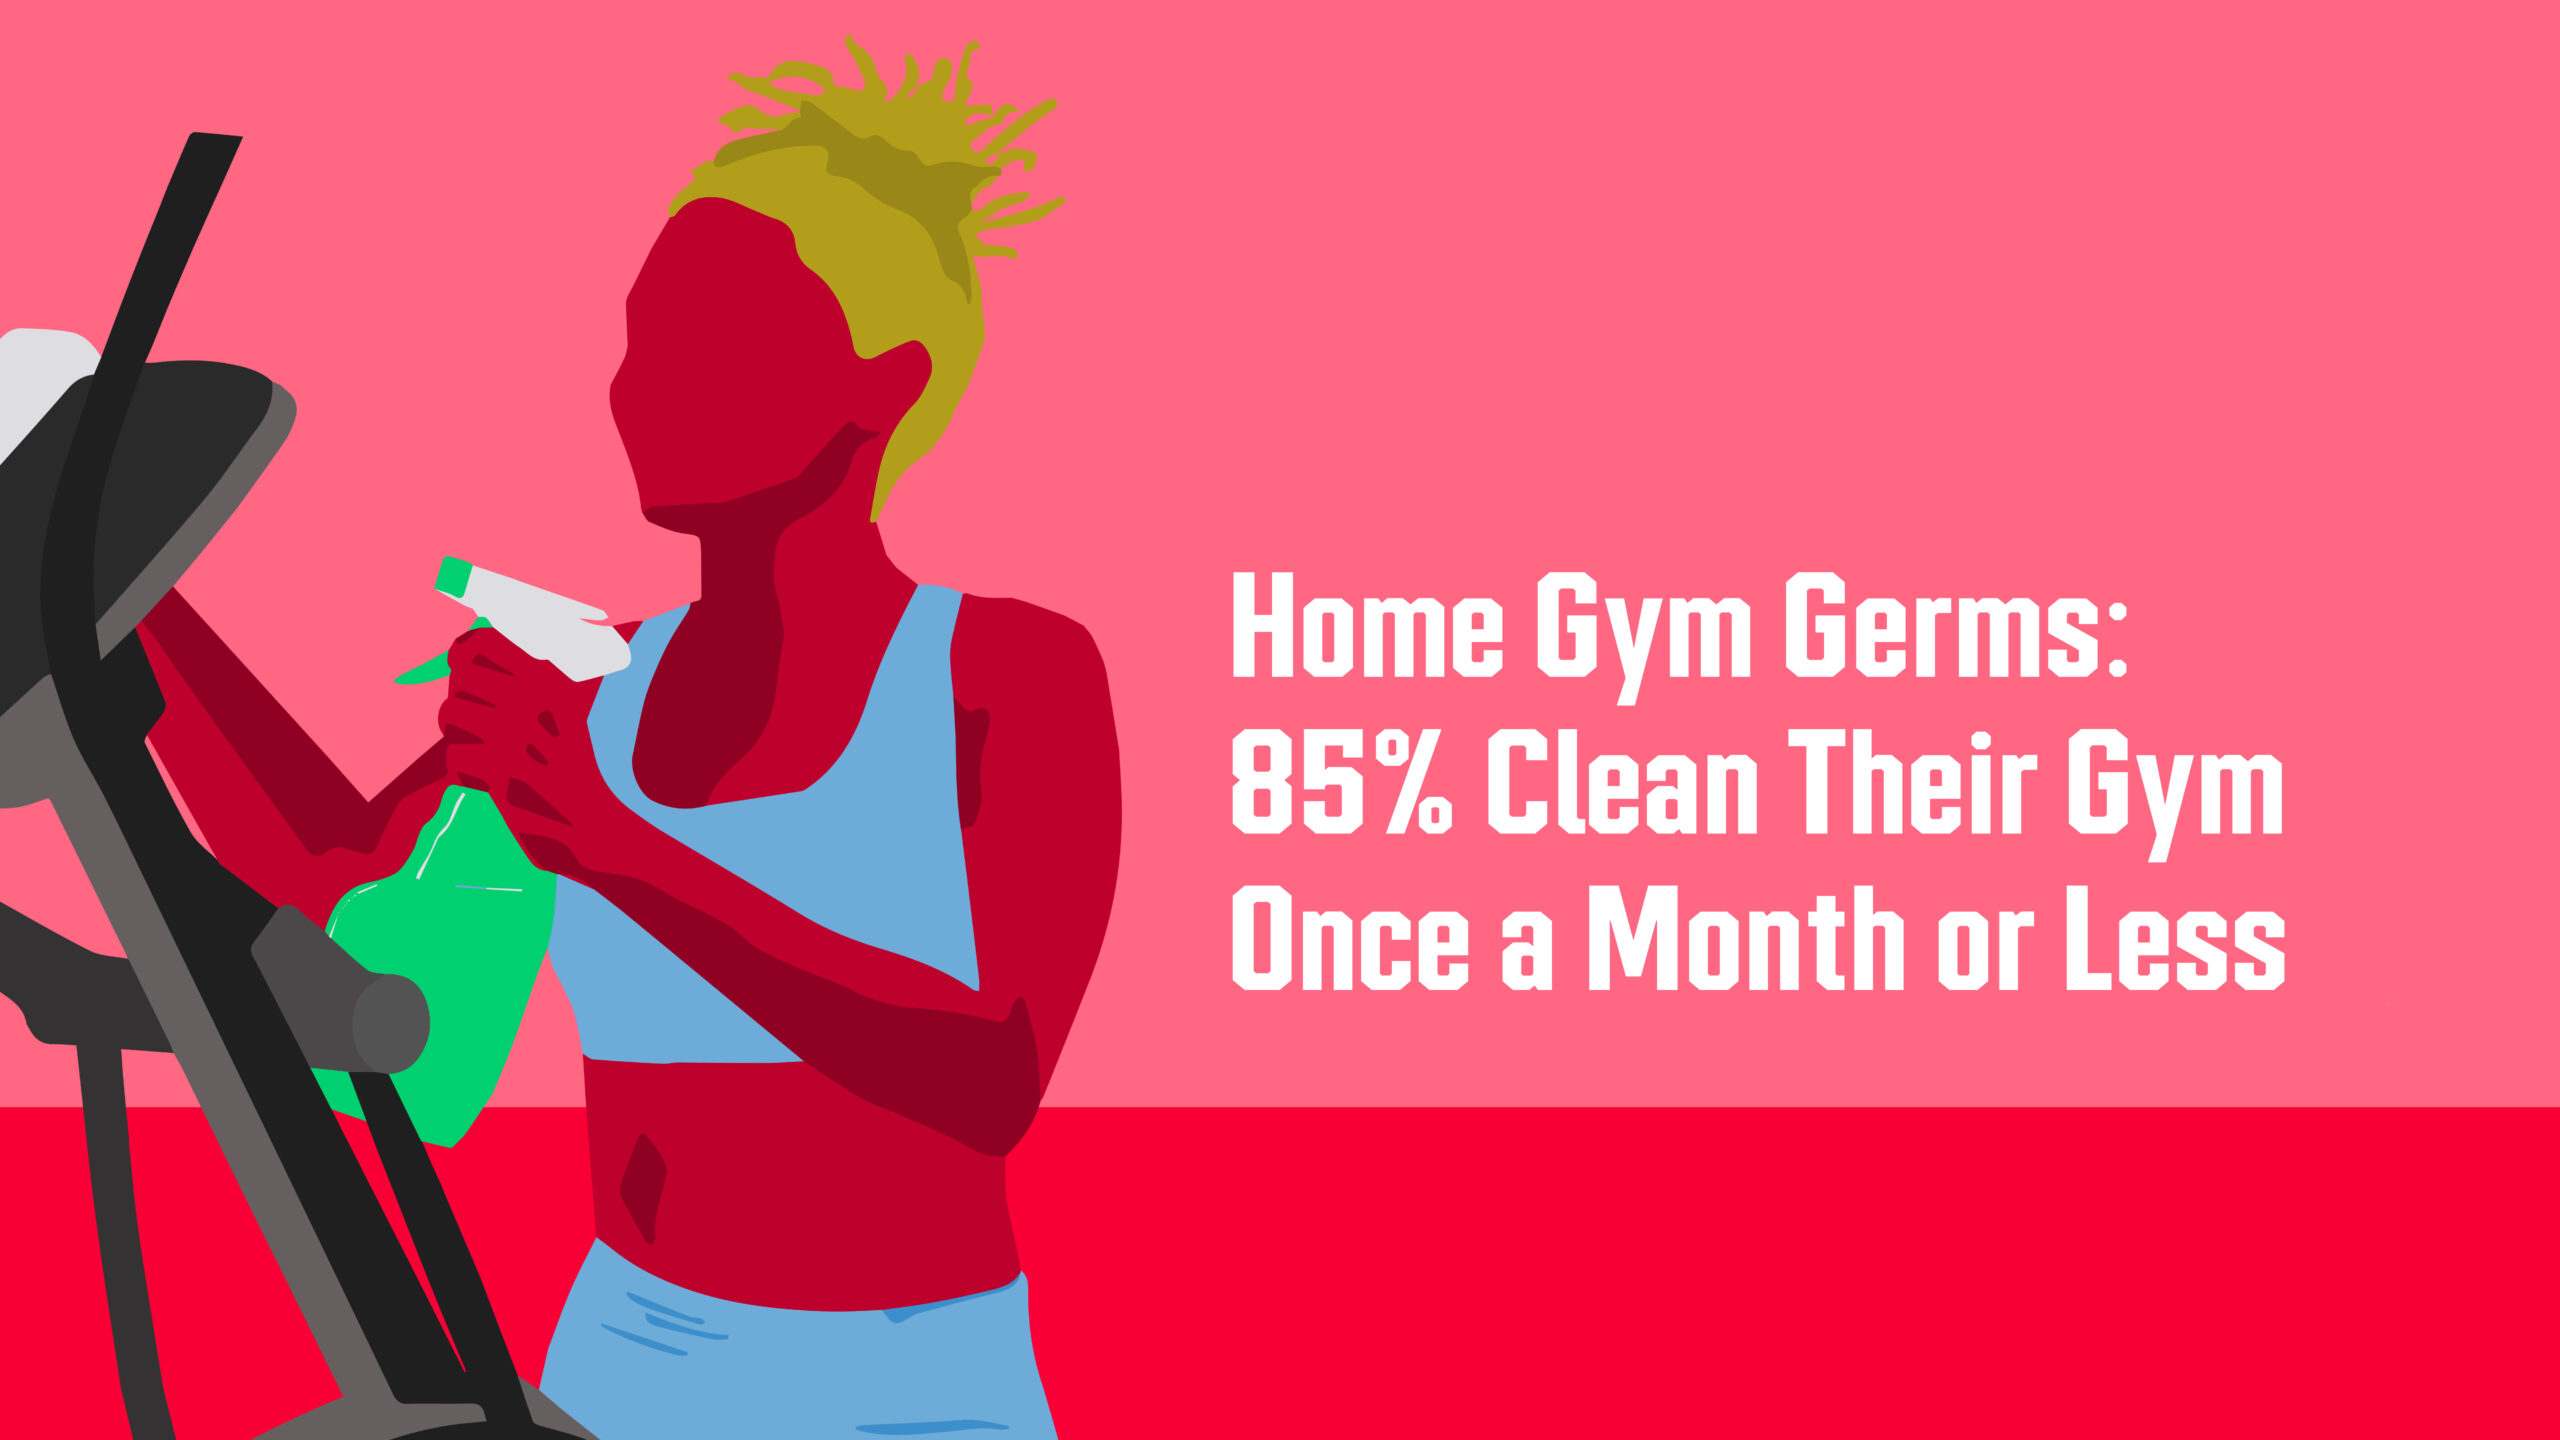 Home Gym Germs: How Often Should You Clean Your Home Gym? Cover Image